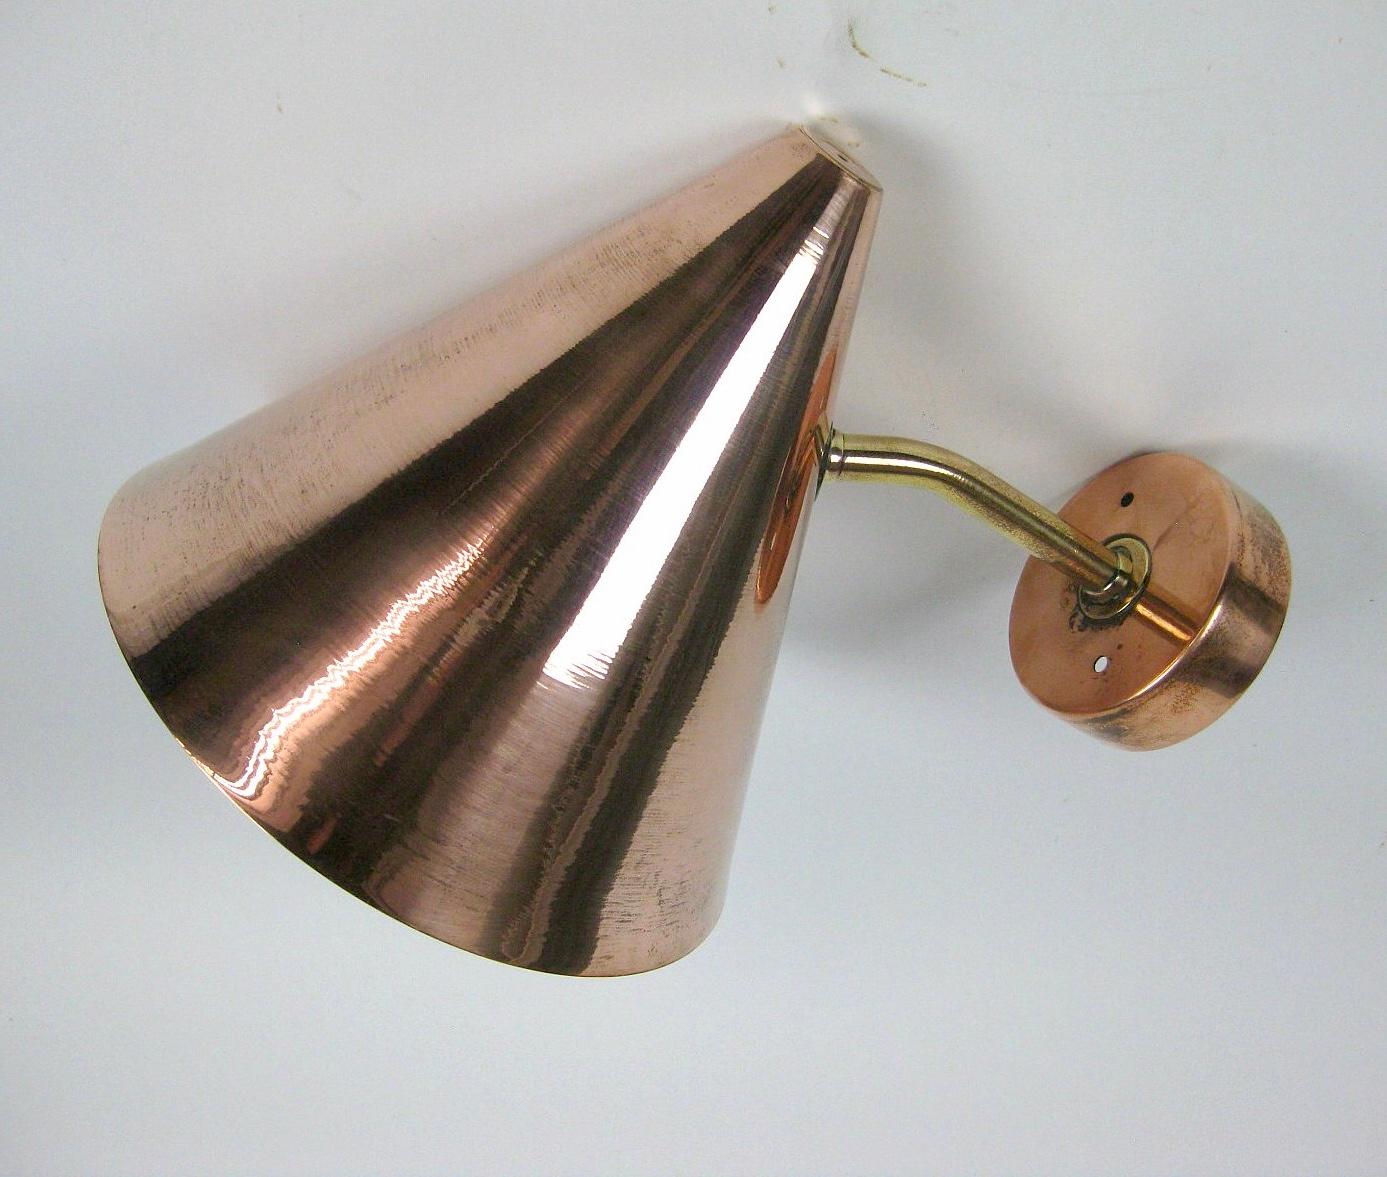 Scandinavian Modern Hans Agne Jakobsson Pair of Cone Shaped Wall Lights in Copper and Brass